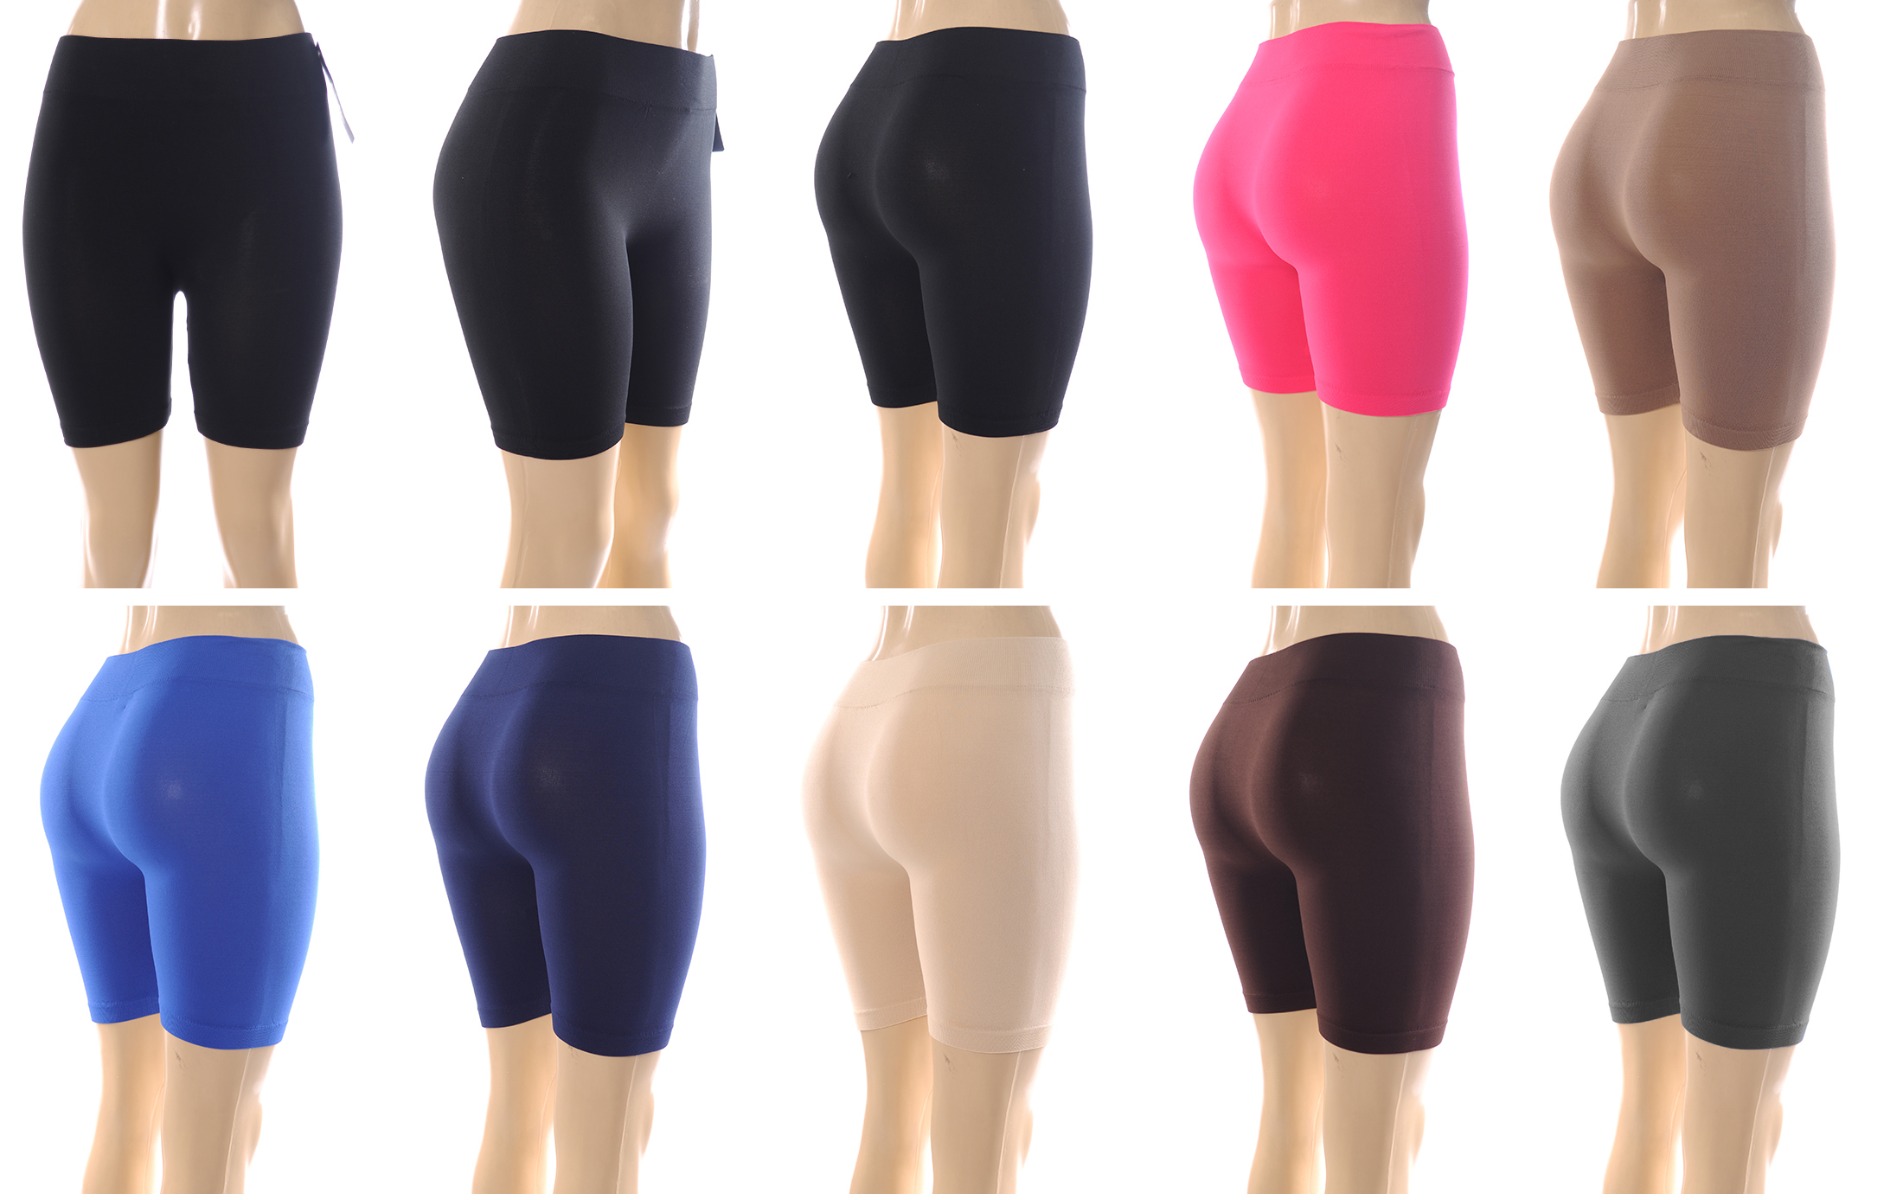 Women's Seamless Bike SHORTS - Assorted Solid Colors - One Size